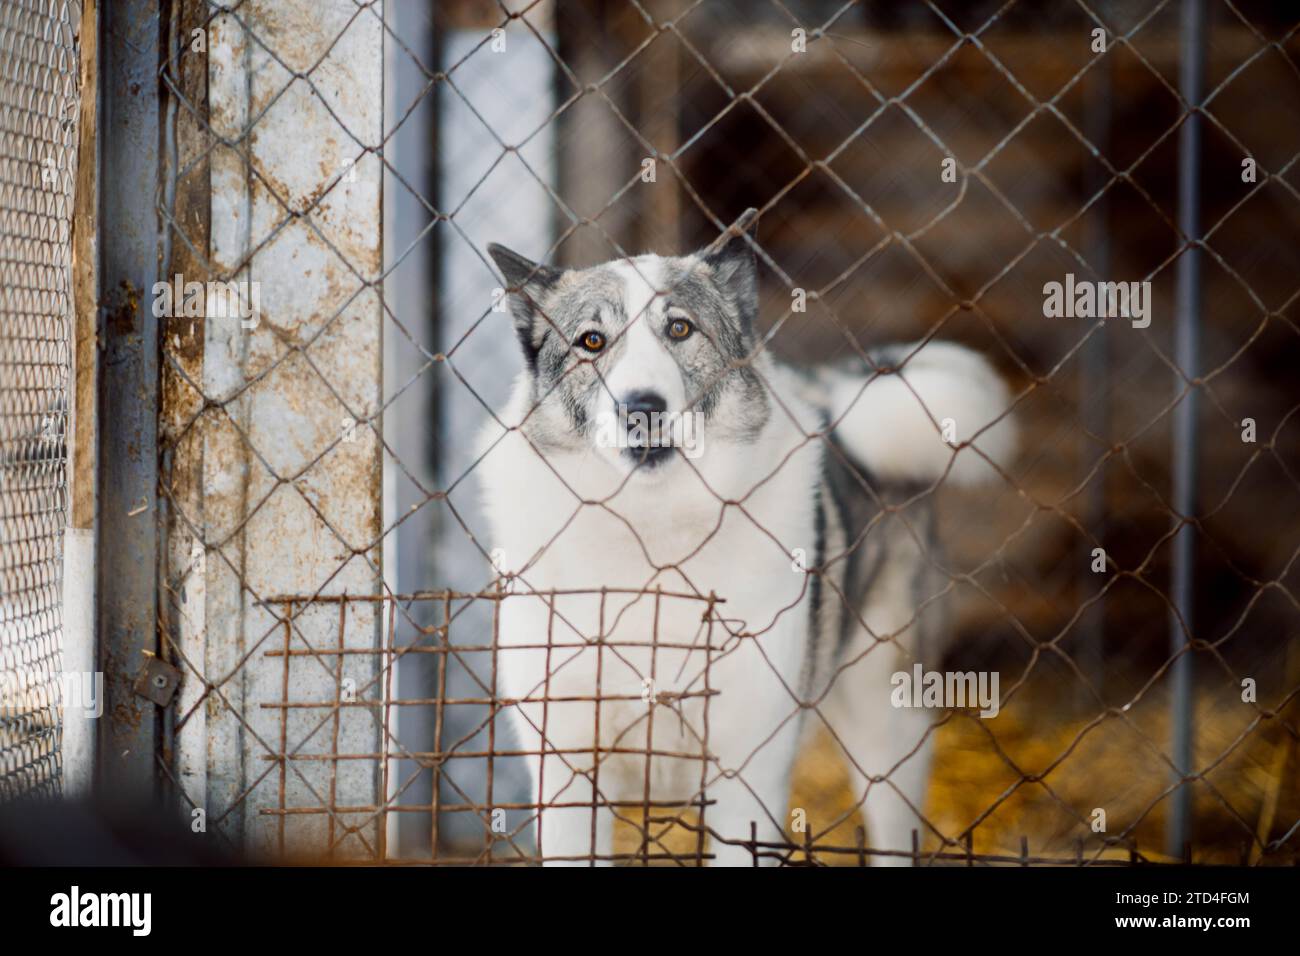 Cute bicolor dog sits alone behind the metal bars in the dog shelter and looks sadly at the camera Stock Photo